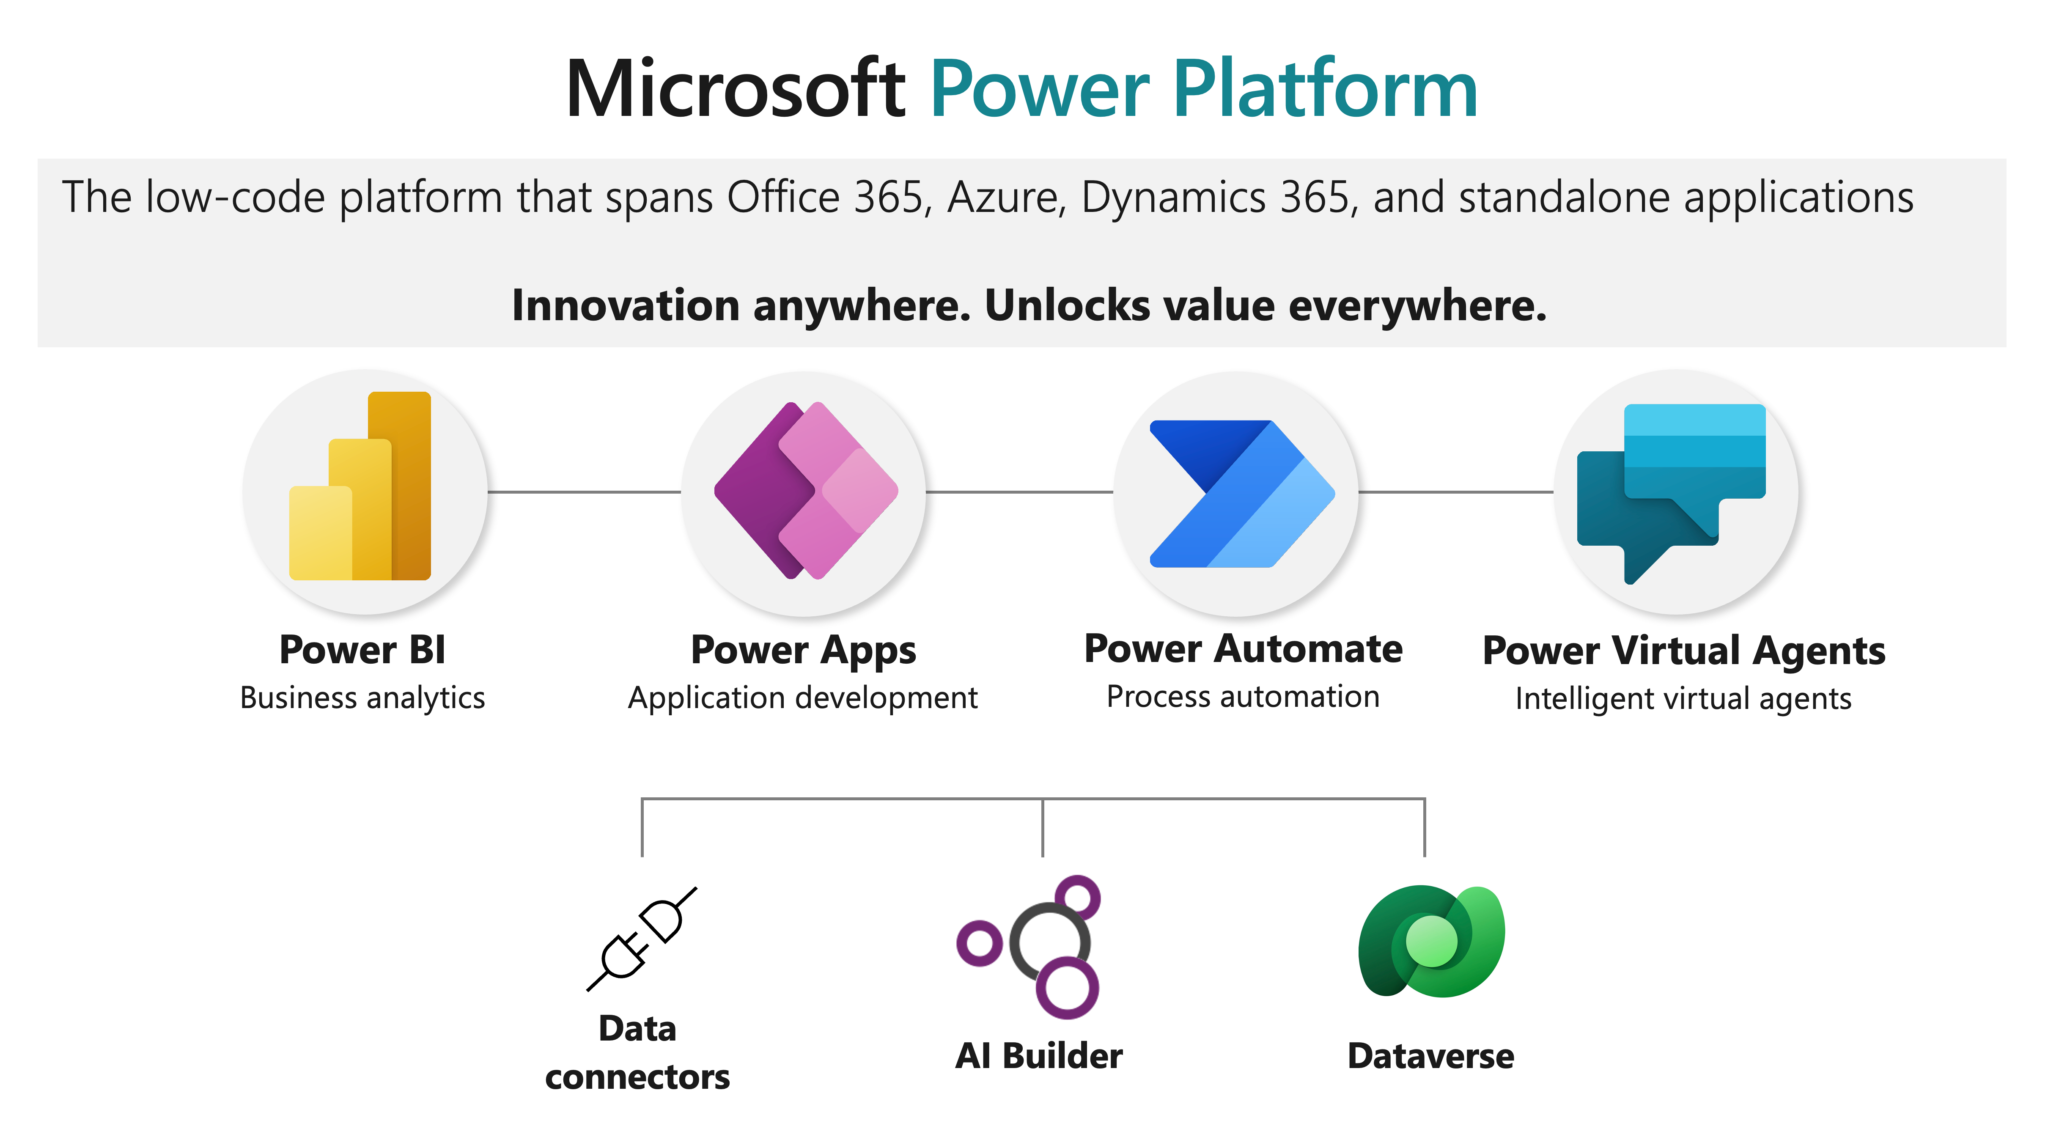 the low-code platform that spans microsoft office 365, azure, dynamics 365 , and stand alone applications